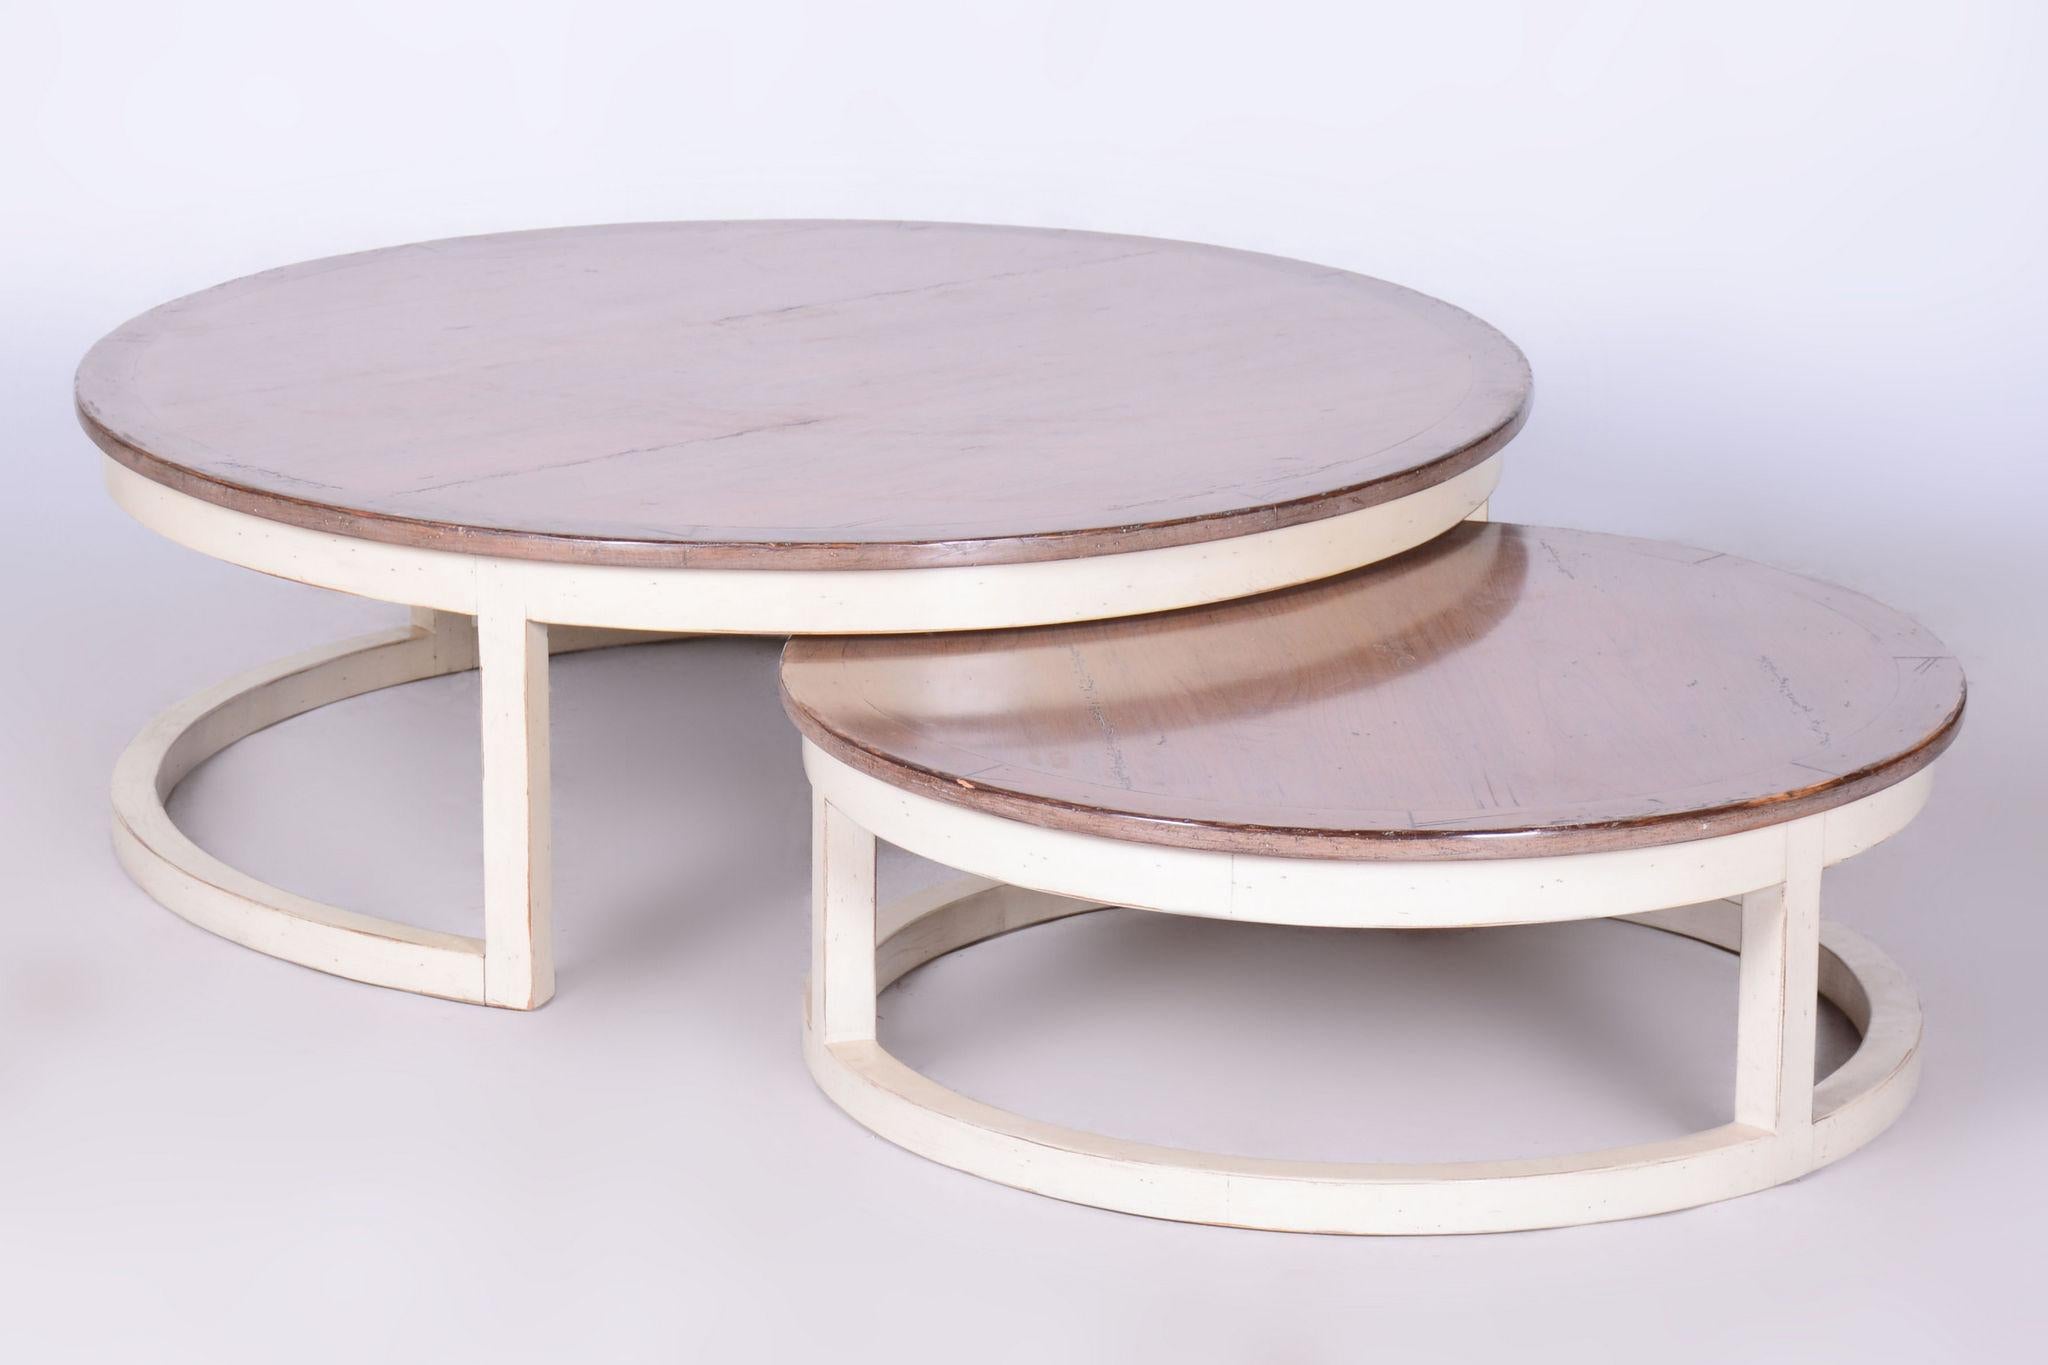 Original Midcentury Coffee Nest Tables, Cherry Wood, France, 1960s For Sale 1